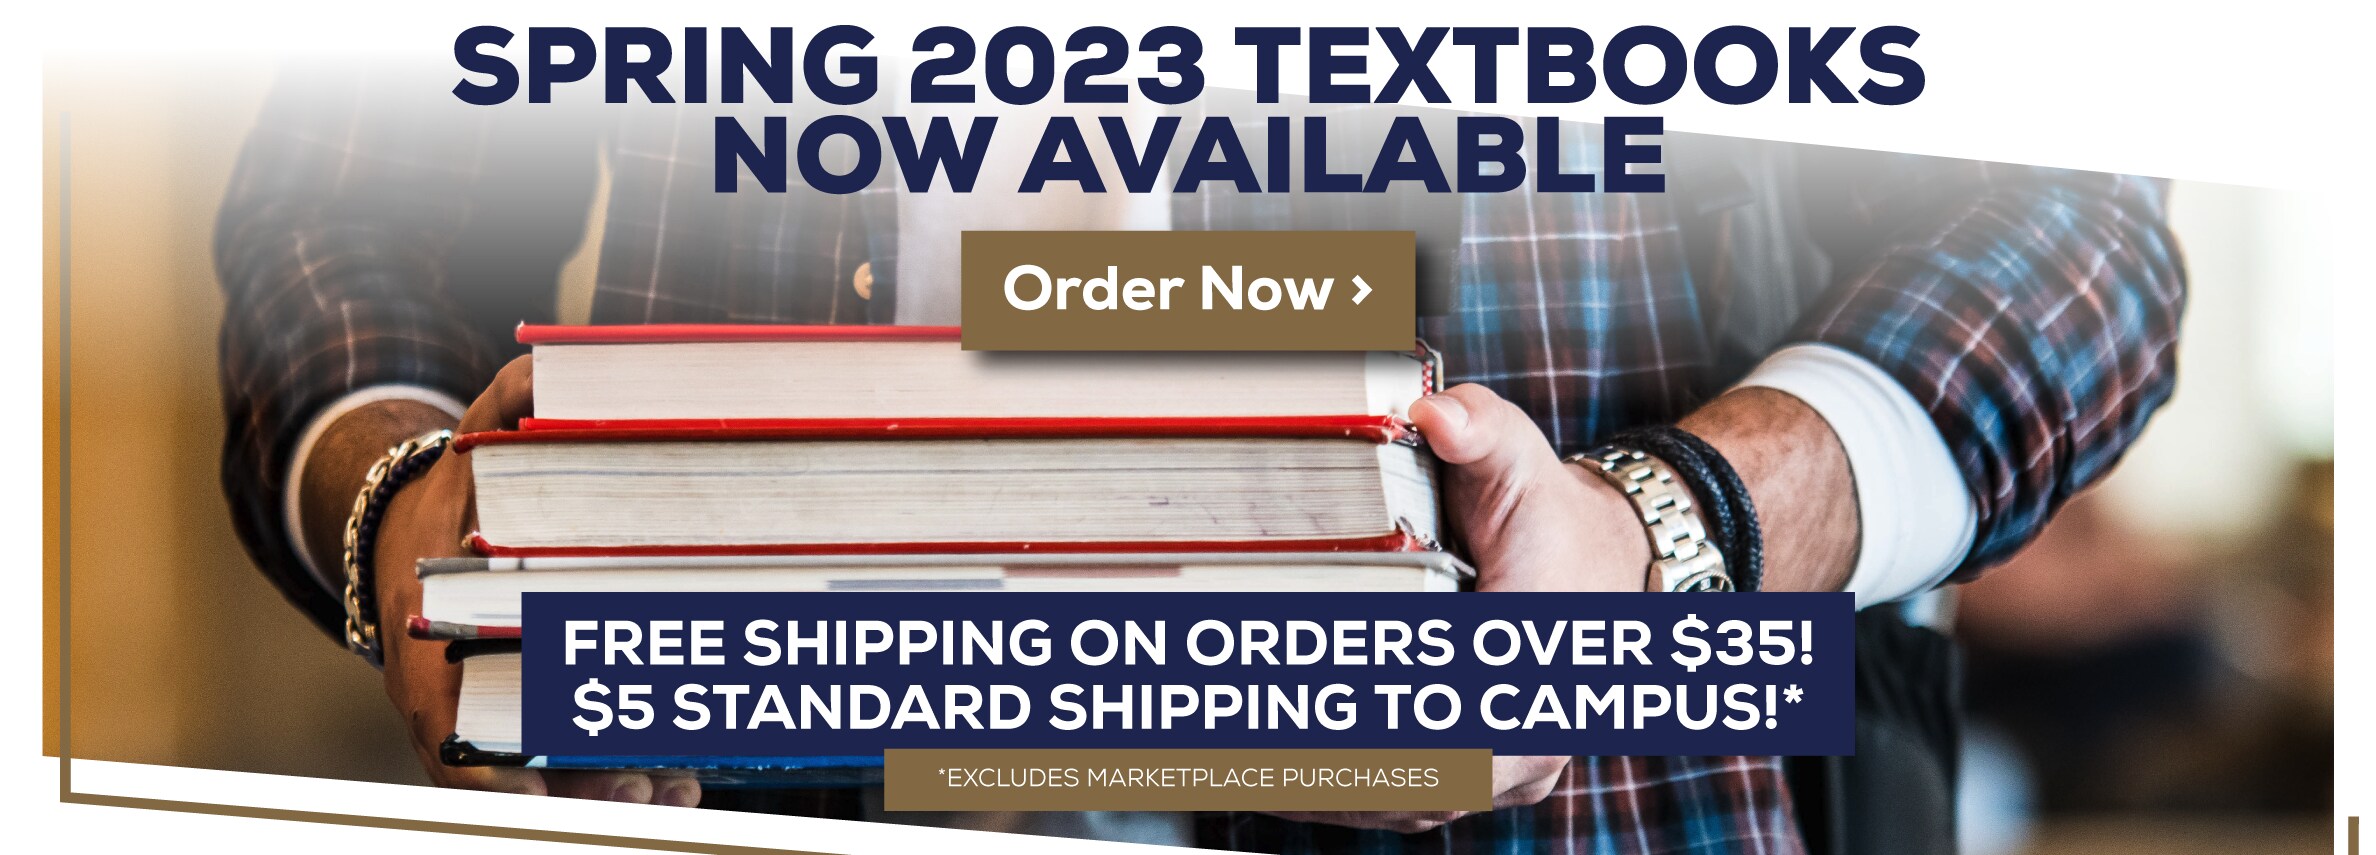 Spring 2023 Textbooks Now Available. Free shipping on orders over $35! $5 standard shipping to campus!* *Excludes Marketplace Purchases. Order Now.